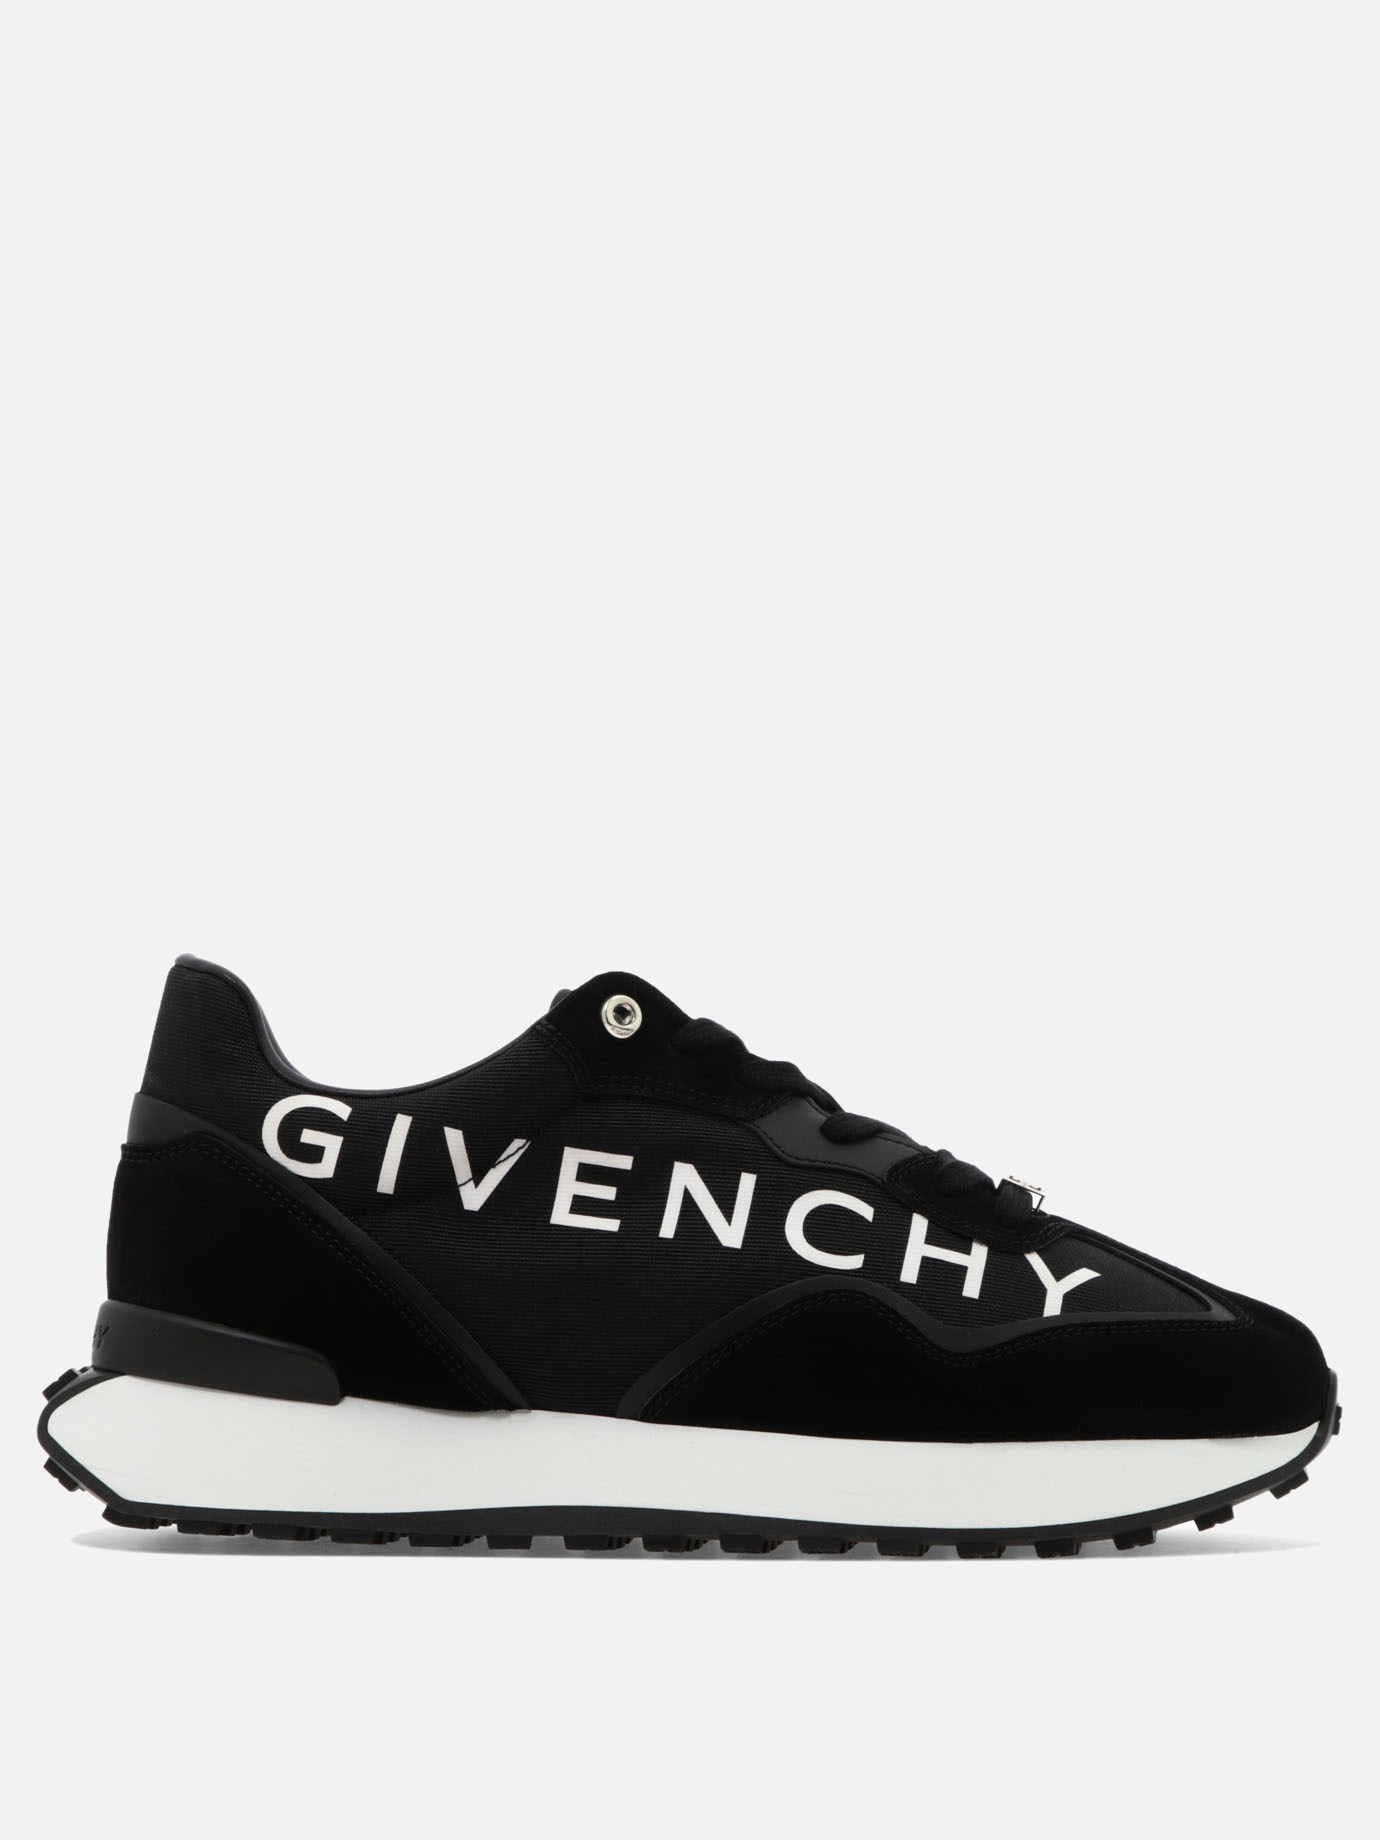  GIV Runner  sneakersby Givenchy - 4